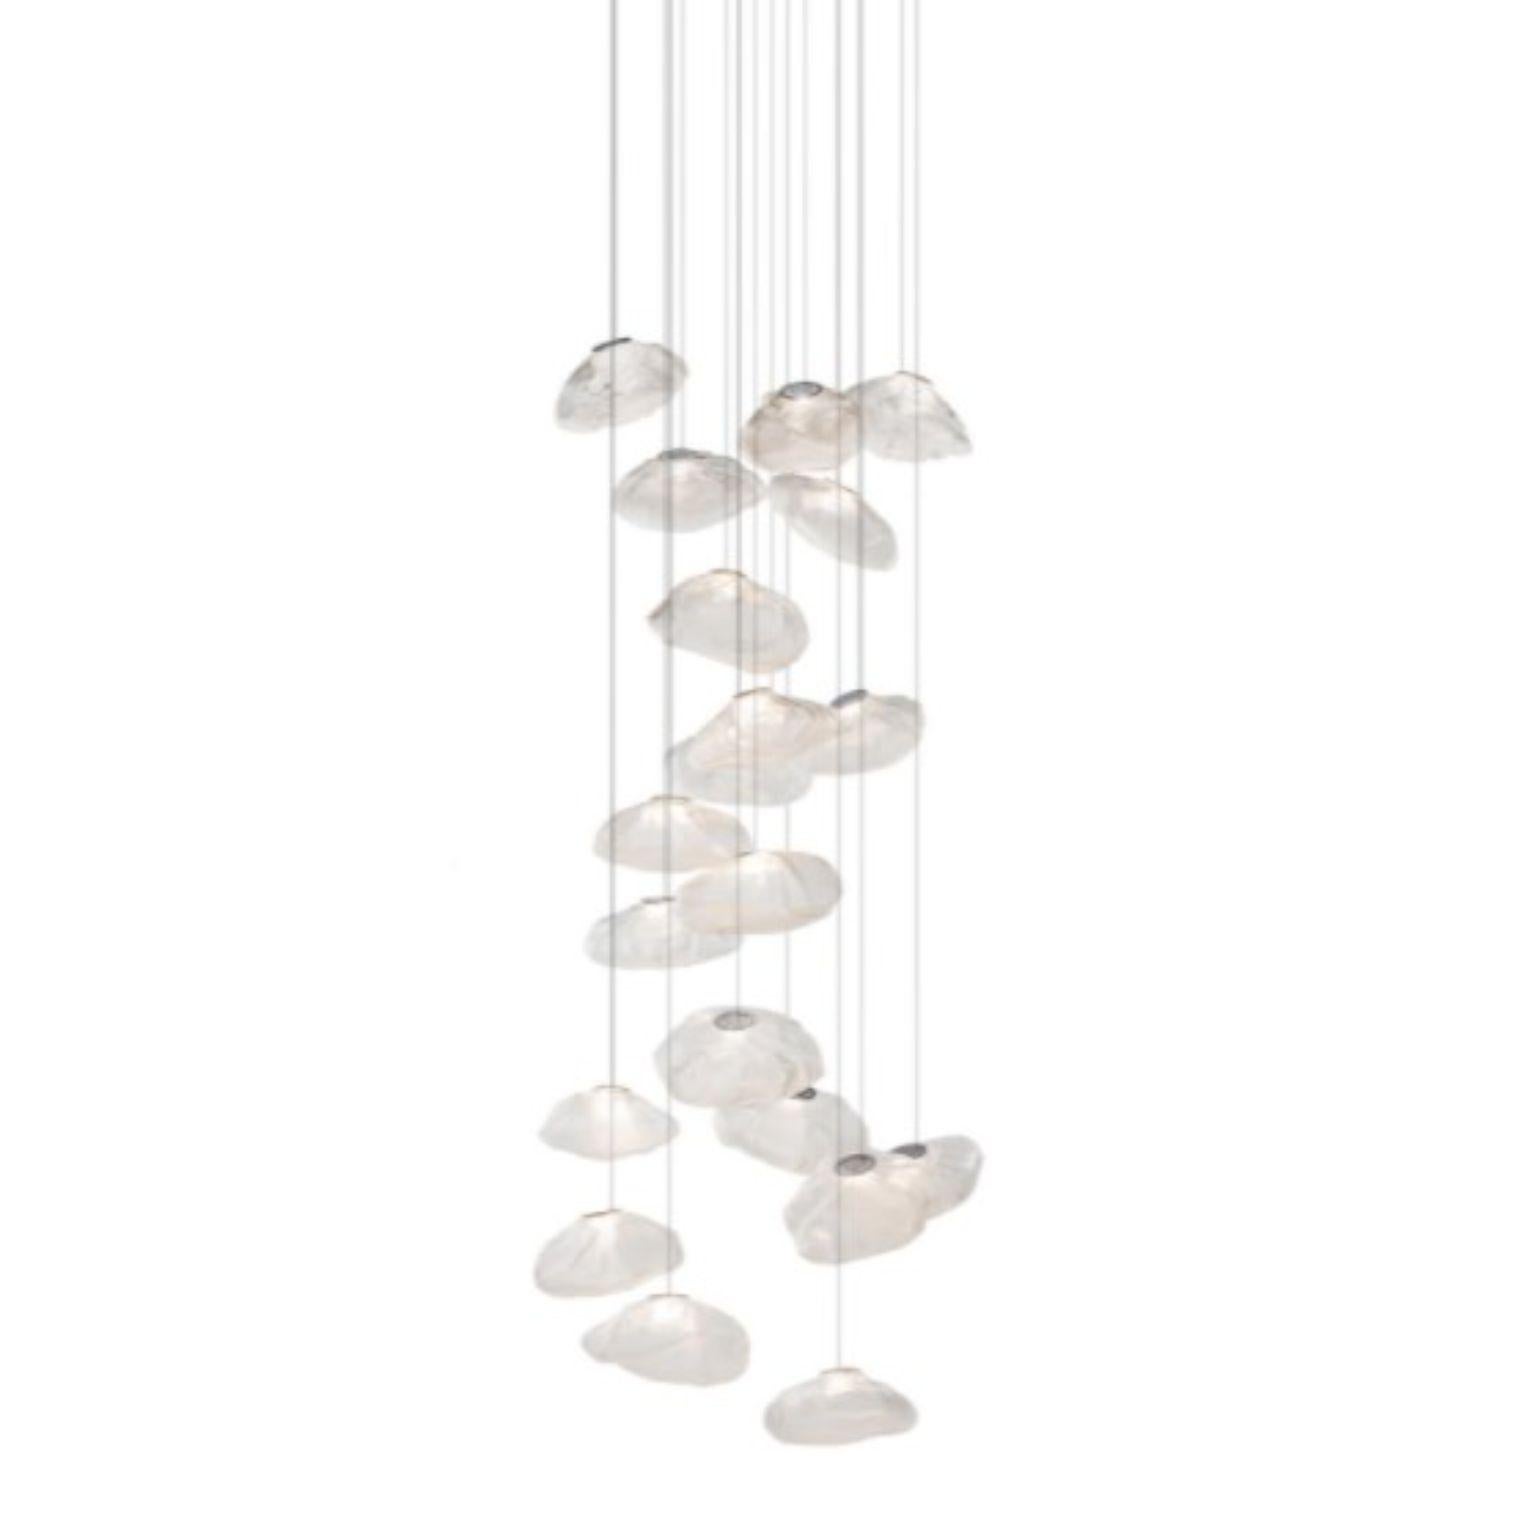 73.20 Pendant by Bocci
Dimensions: D75.5 x H300 cm
Materials: brushed nickel round canopy
Weight: 69 kg
Also available in different dimensions and colours.

All our lamps can be wired according to each country. If sold to the USA it will be